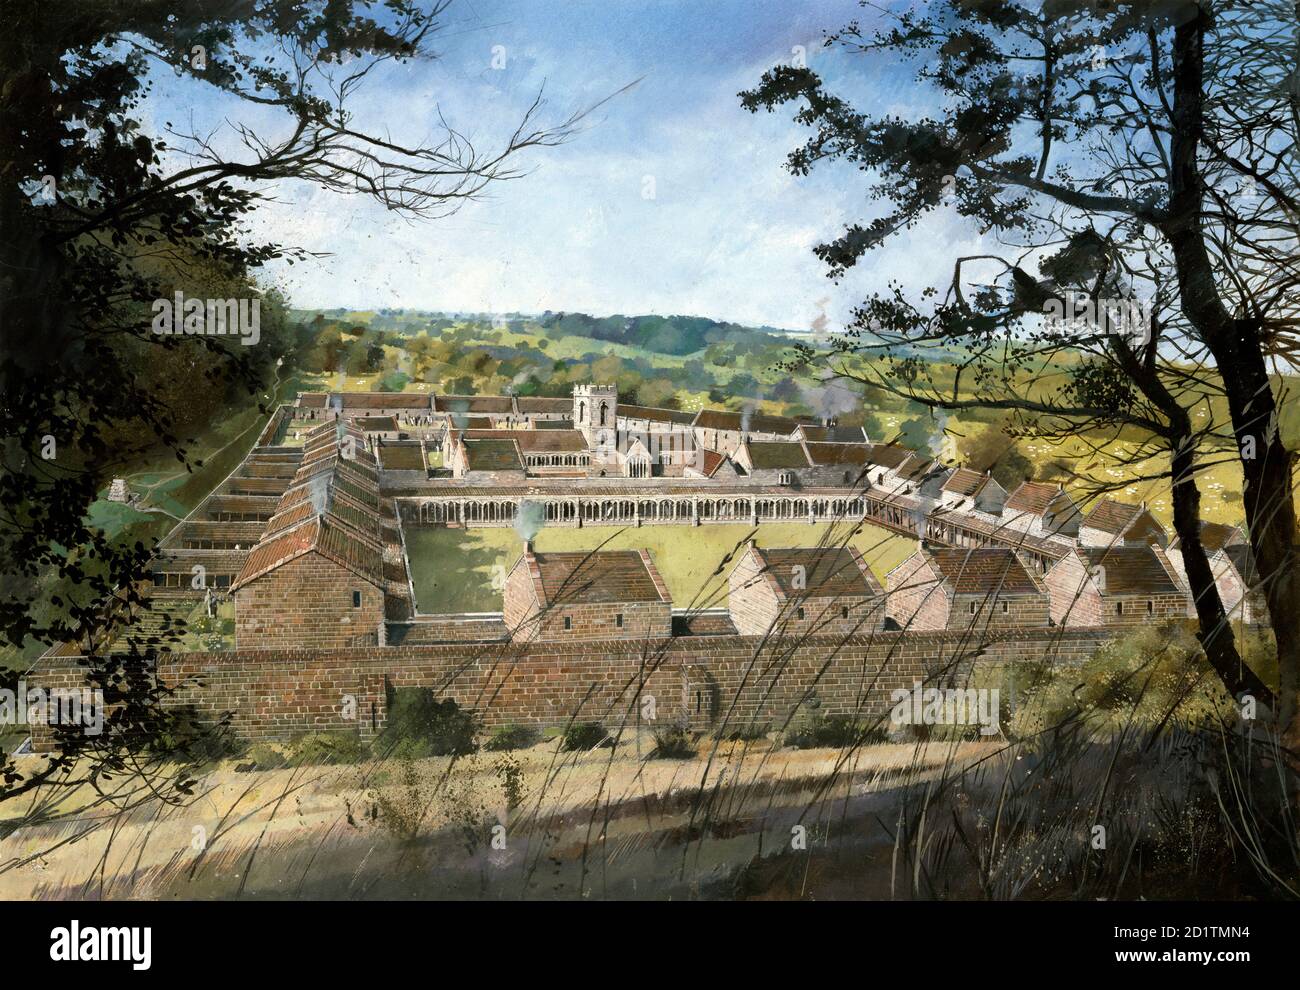 MOUNT GRACE PRIORY. North Yorkshire. Reconstruction drawing by Ivan Lapper. General view of the priory before dissolution. Stock Photo